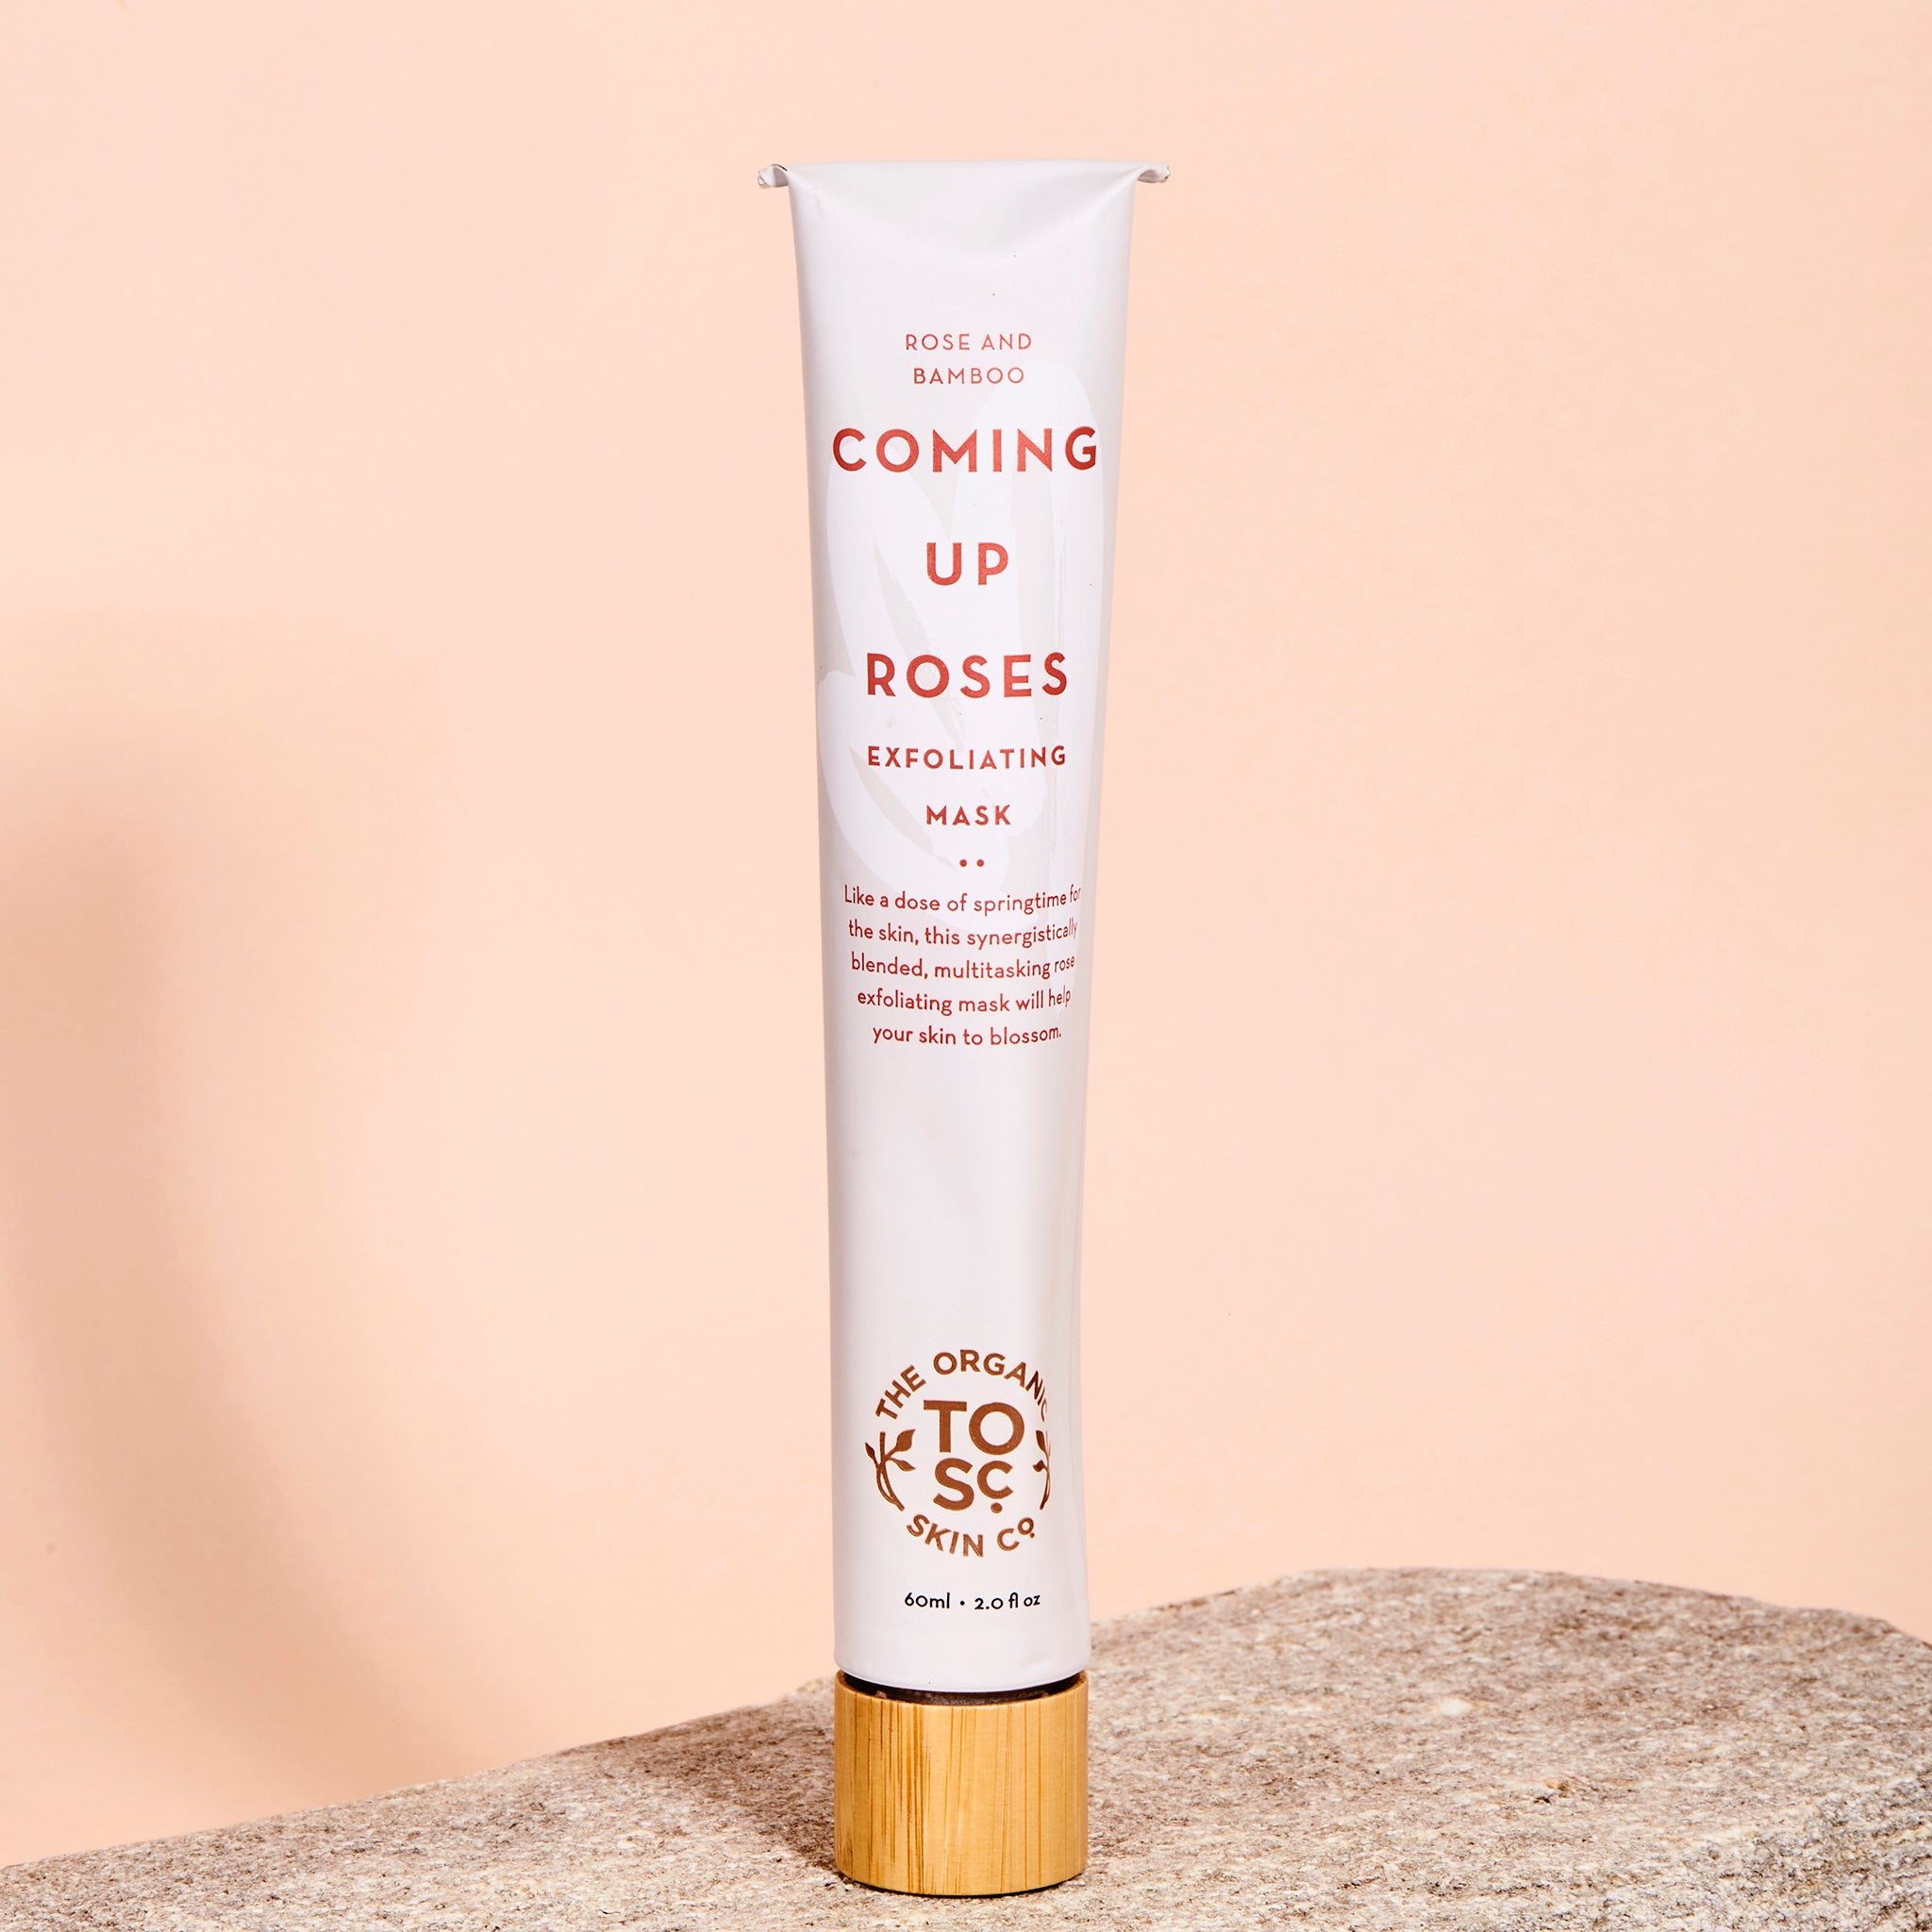 Coming Up Roses, Rose and Bamboo Exfoliating Mask